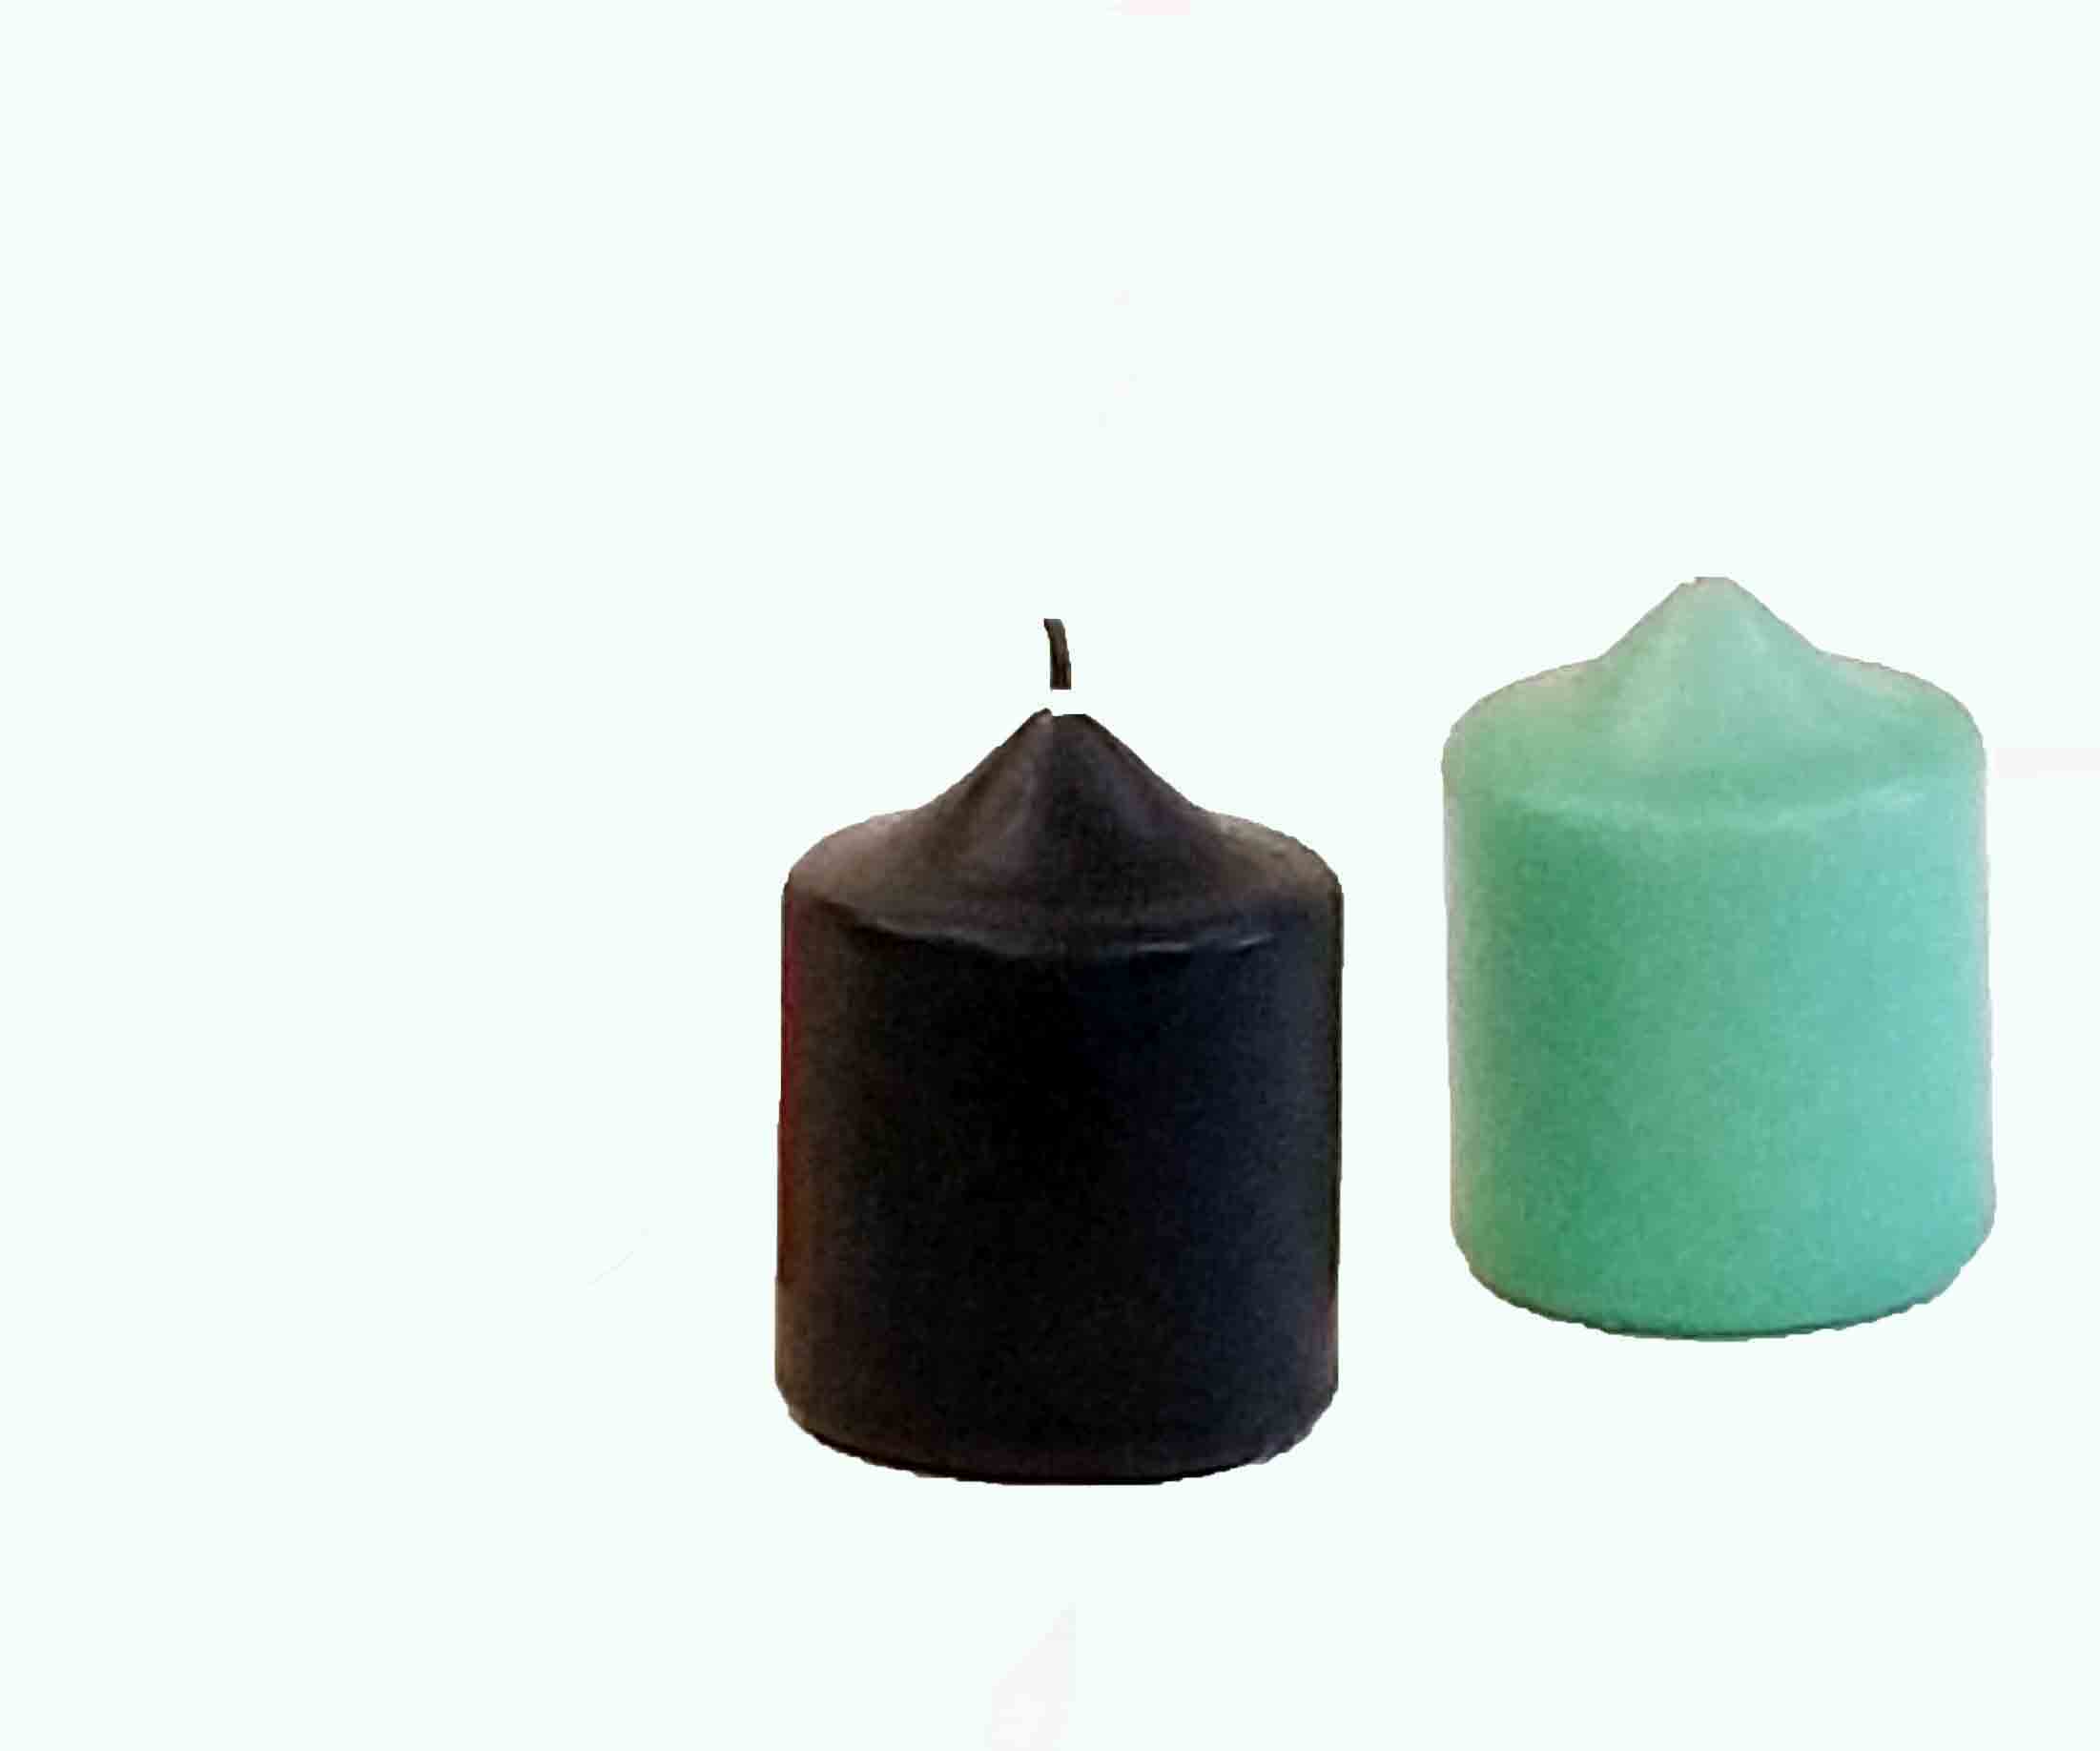 PC2 - 2" x 2.5" Scented Pillar Candle - 1.25 ea, 1.05/12